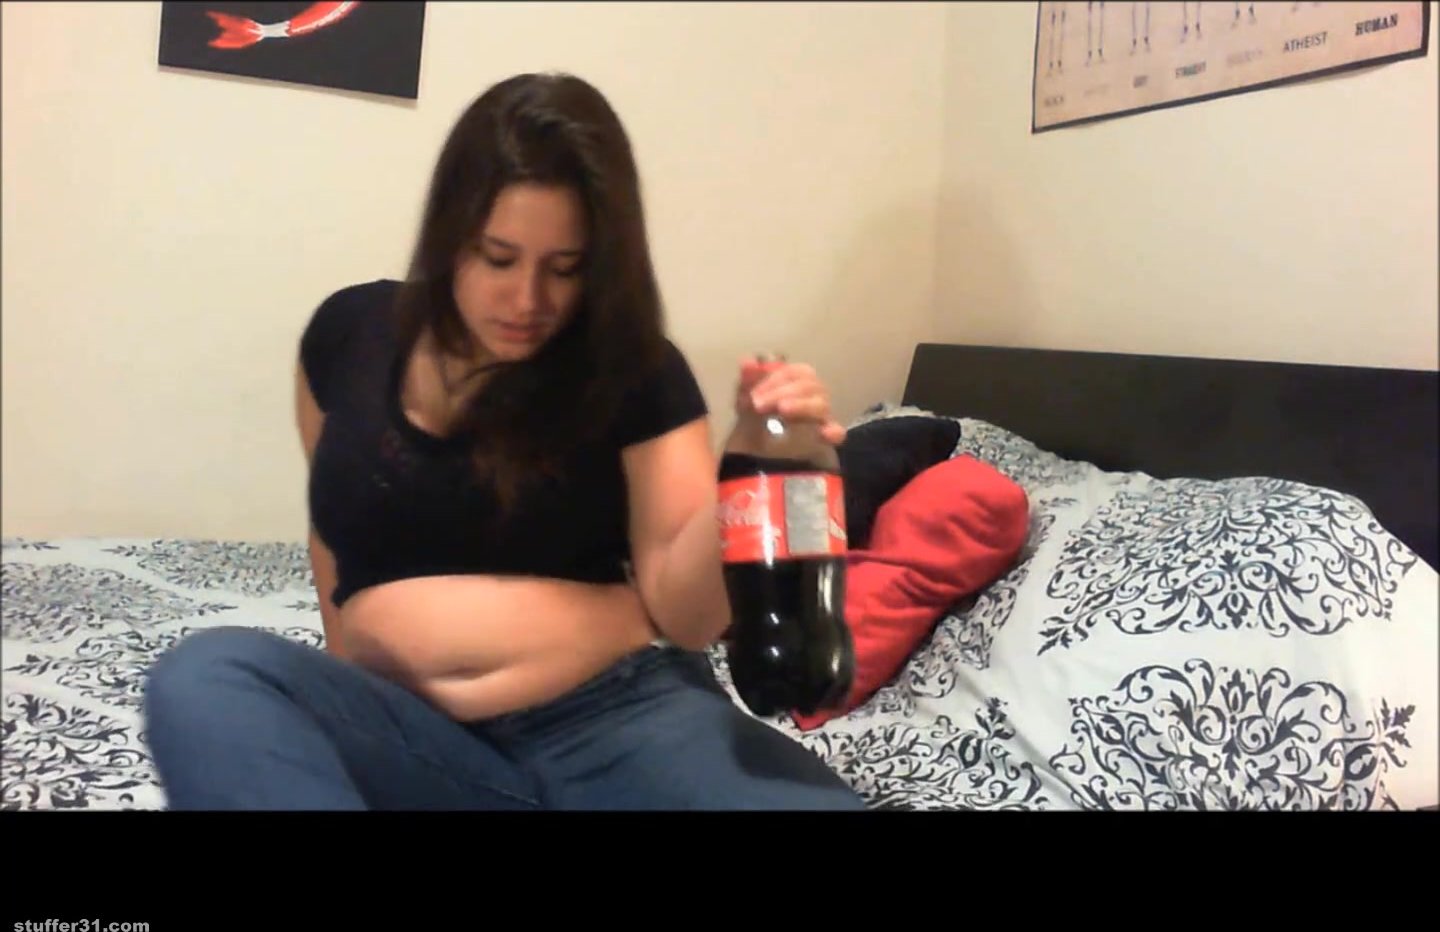 chugging and burp drink a coke